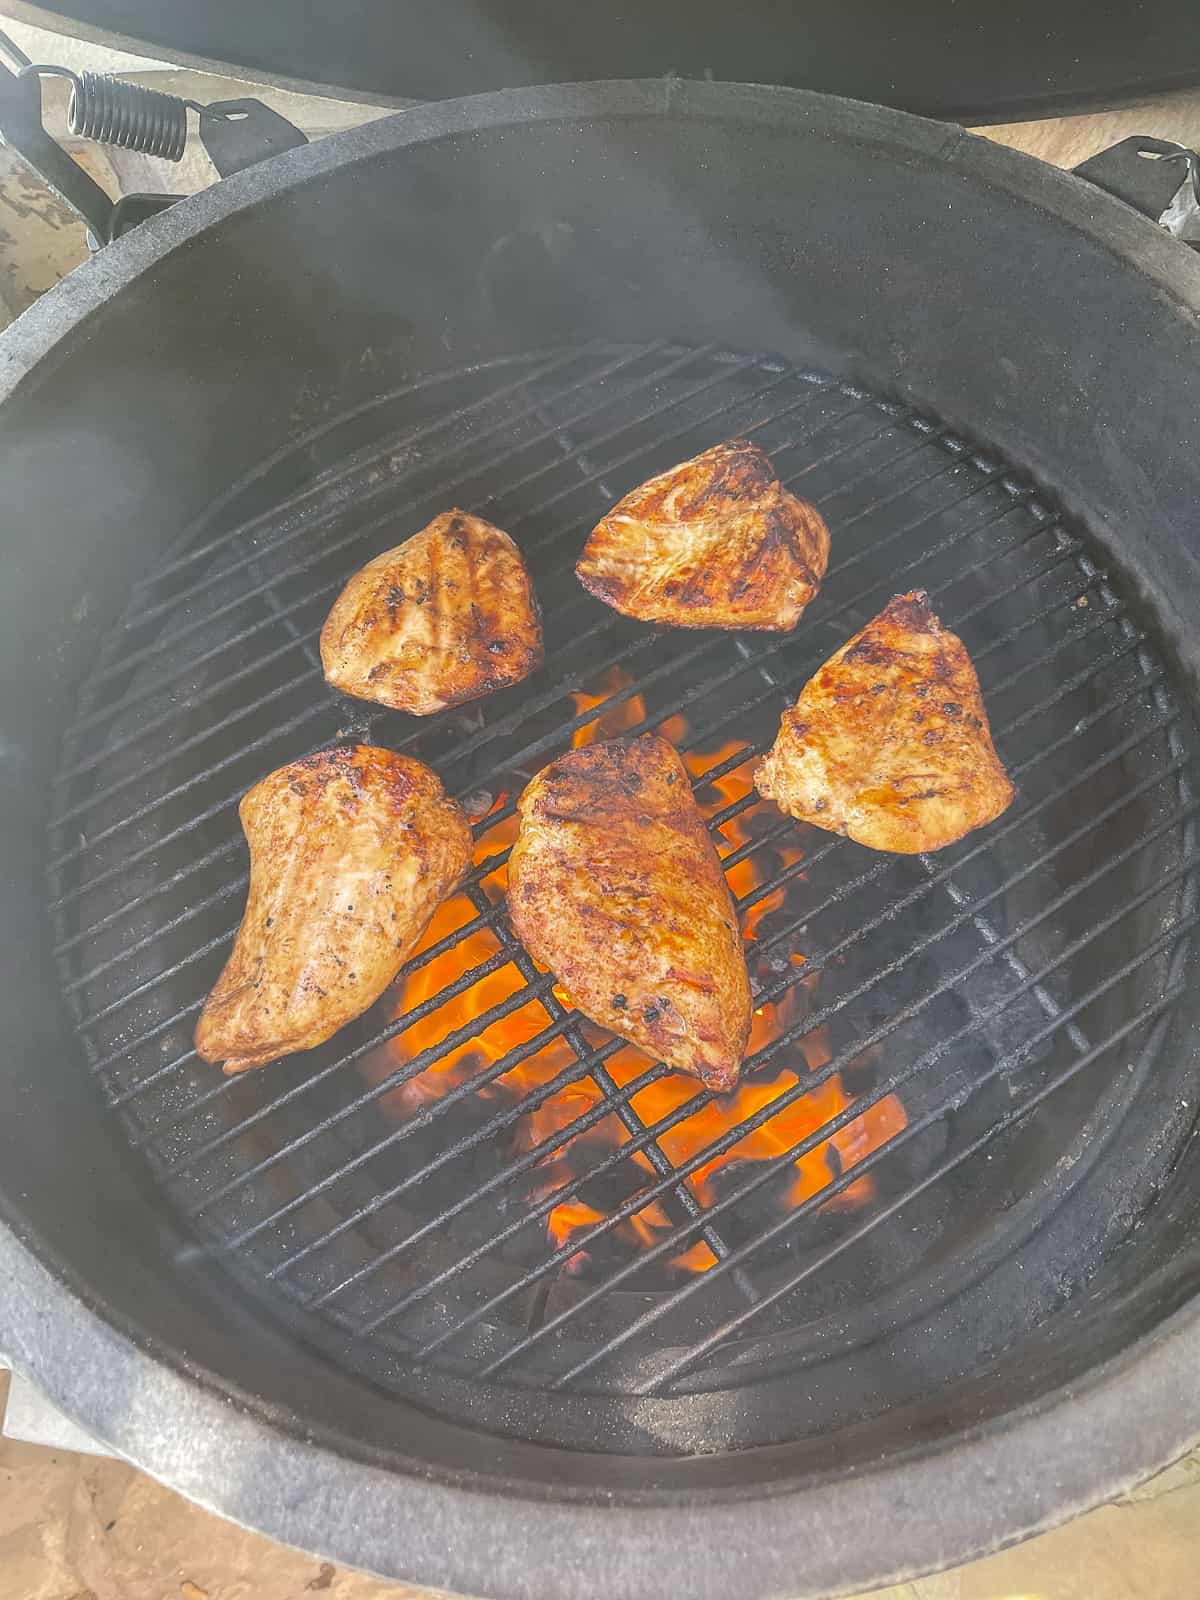 The chicken breasts on the Big Green Egg.